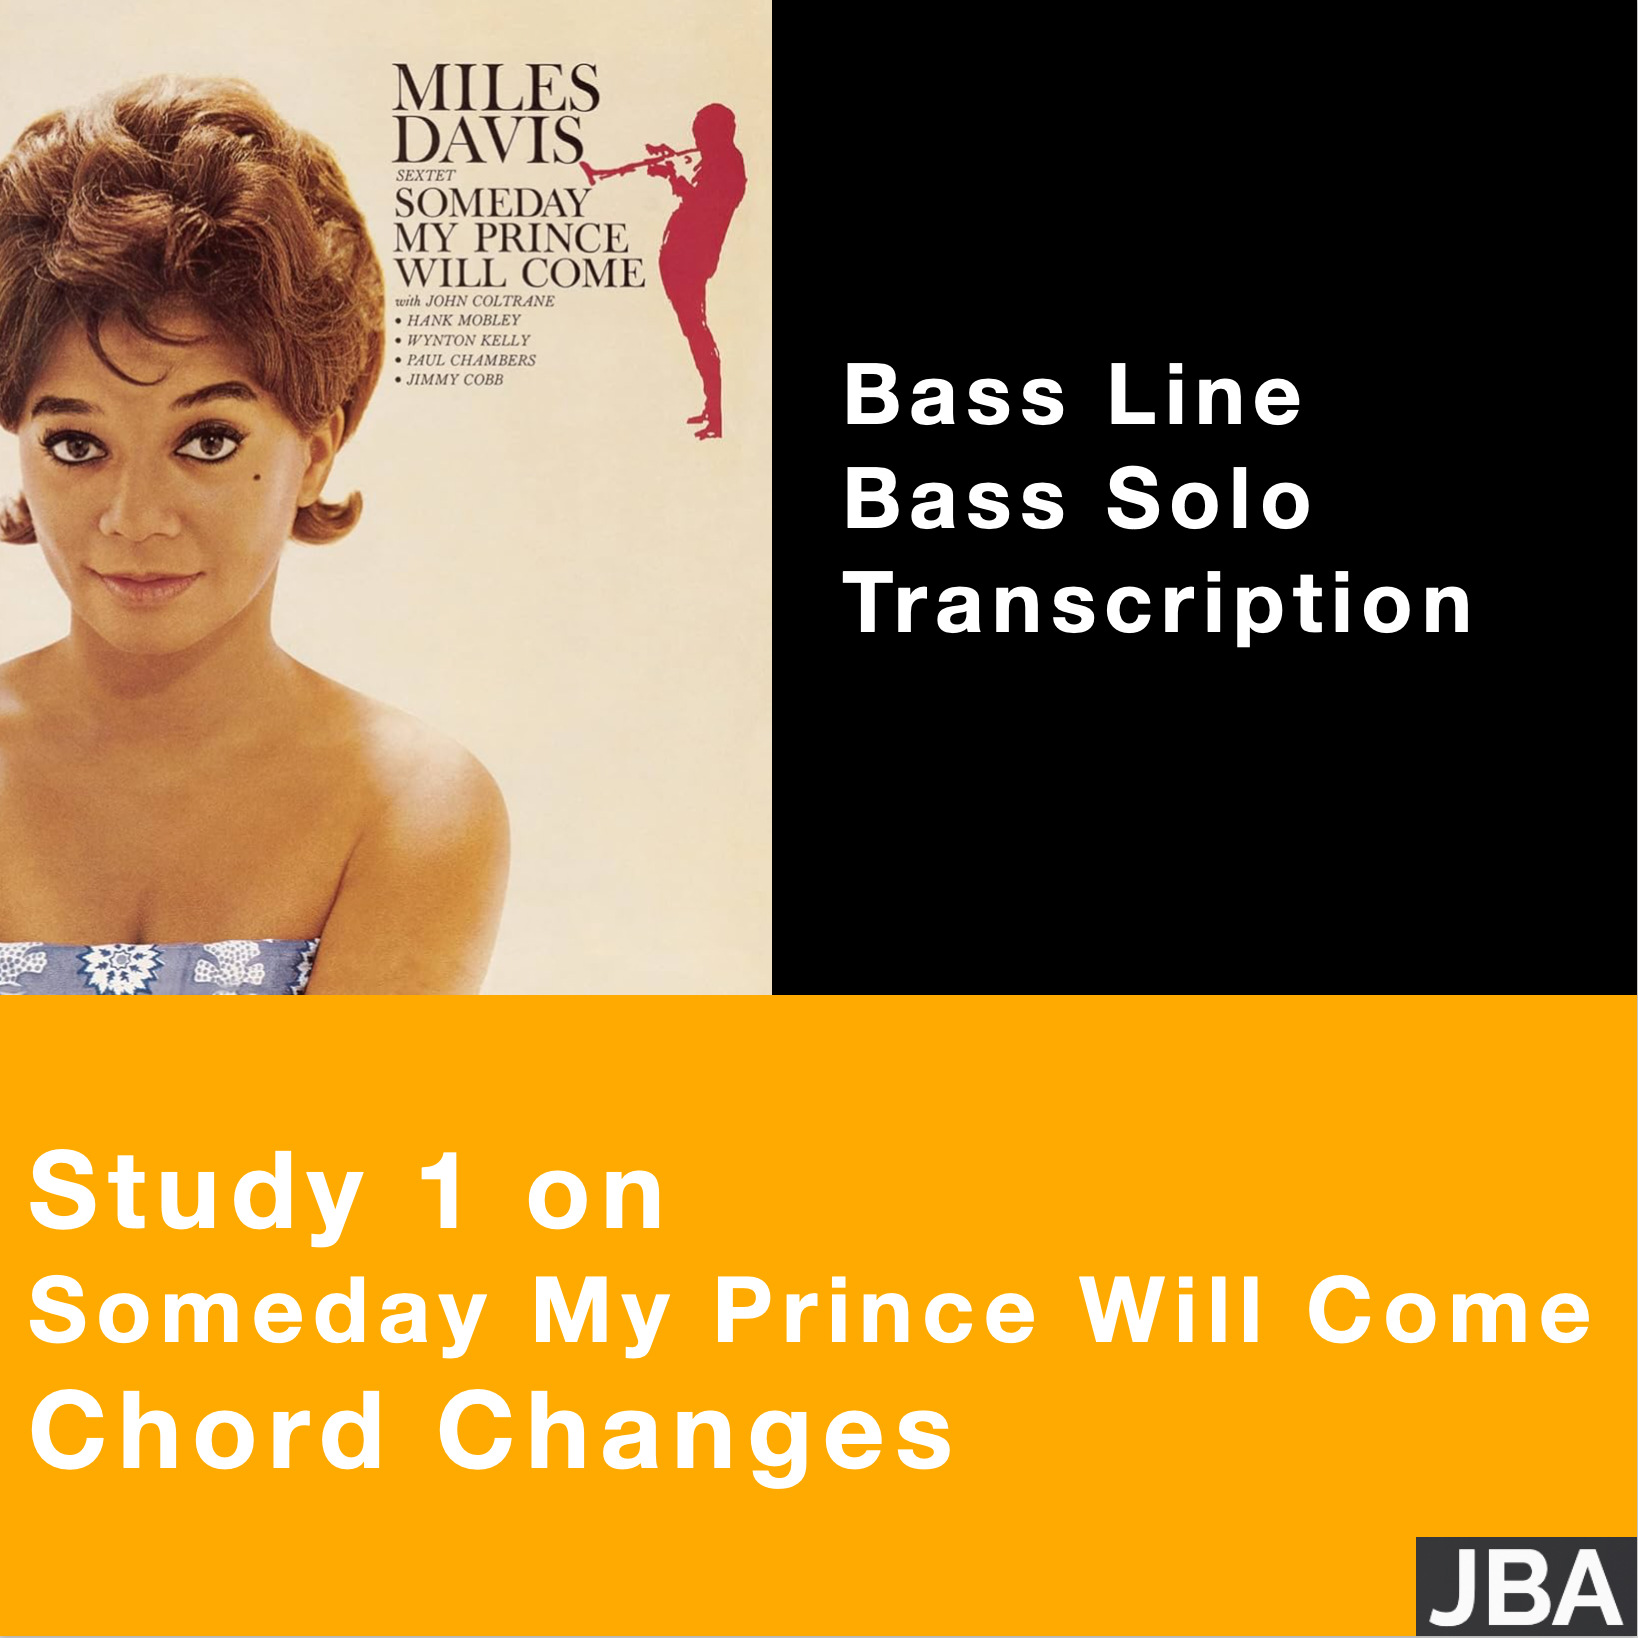 Study 1 on Someday My Prince Will Come chord changes (WITH LESSON INCLUDED)